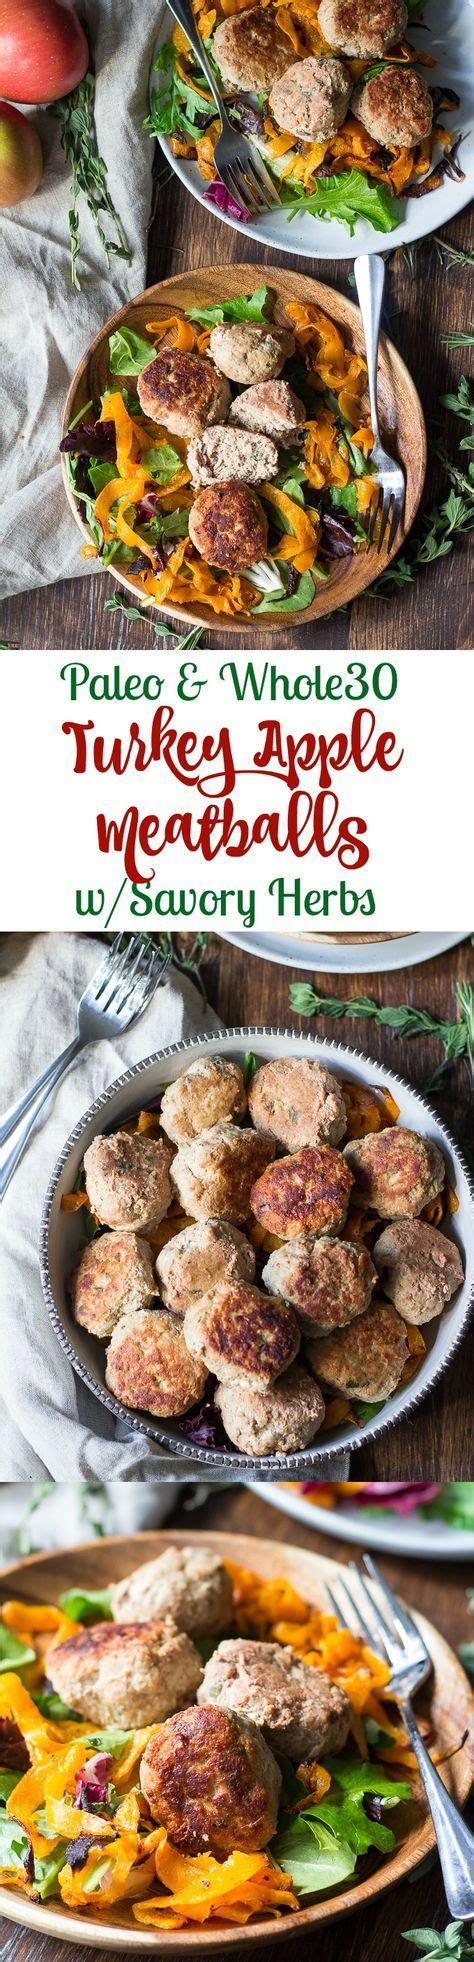 Add garlic and saute until golden, being careful not to burn. Paleo turkey meatballs with apples and savory herbs ...